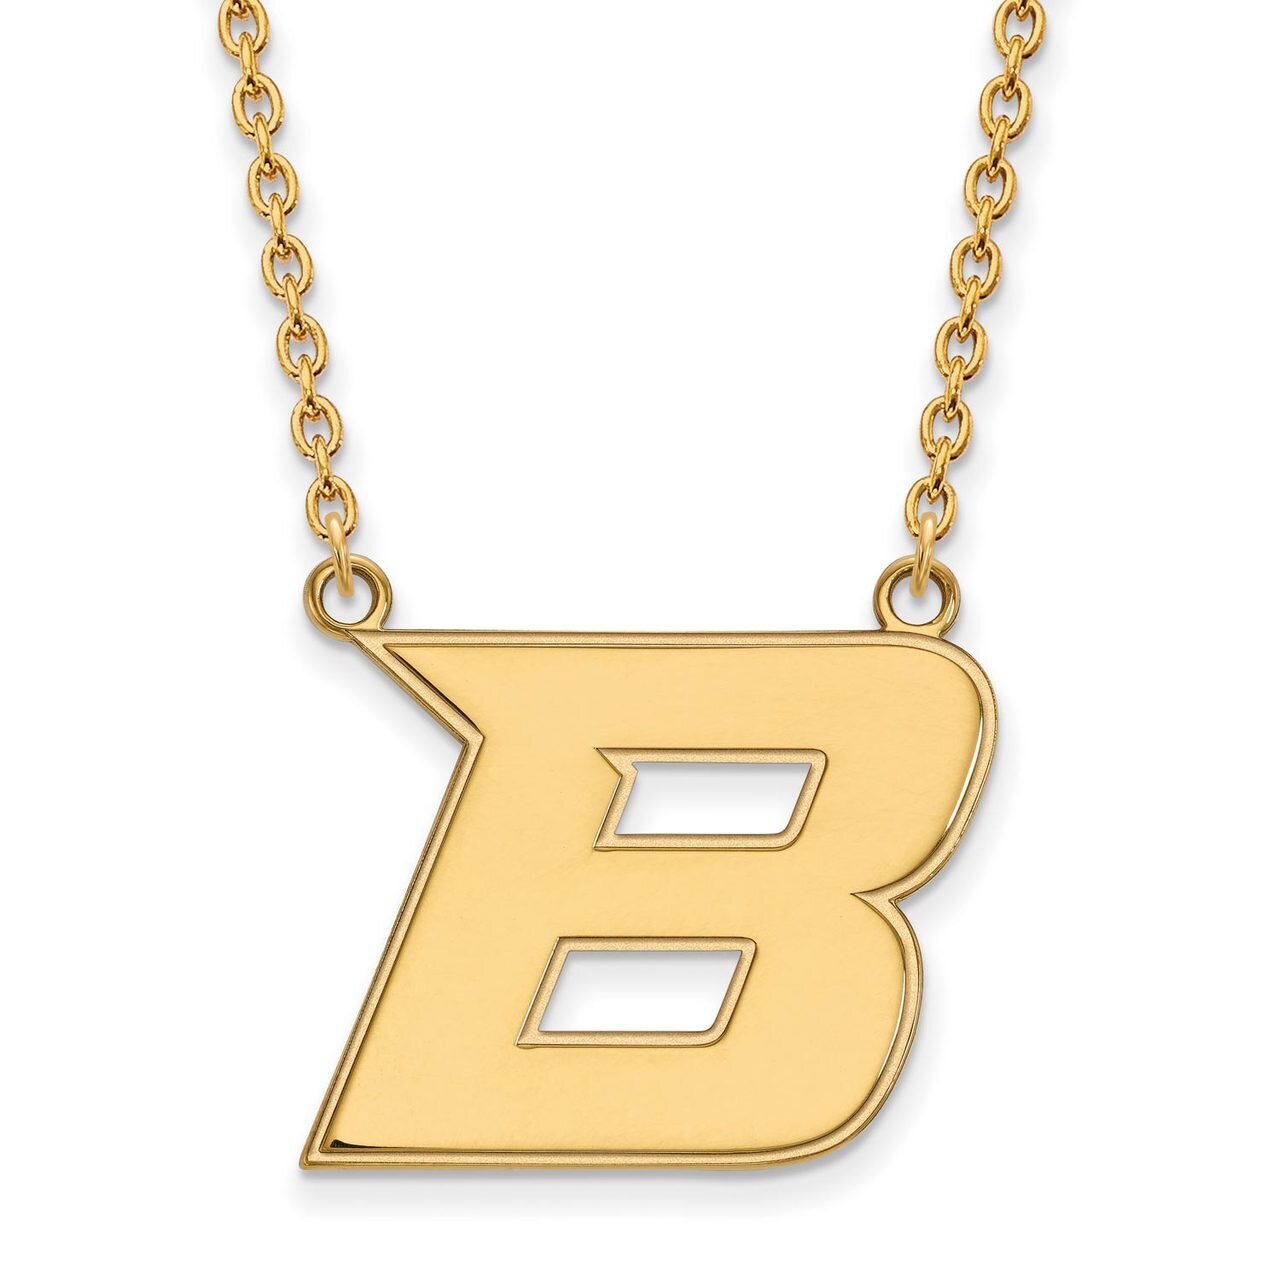 Boise State University Large Pendant with Chain Necklace Gold-plated Silver GP008BOS-18